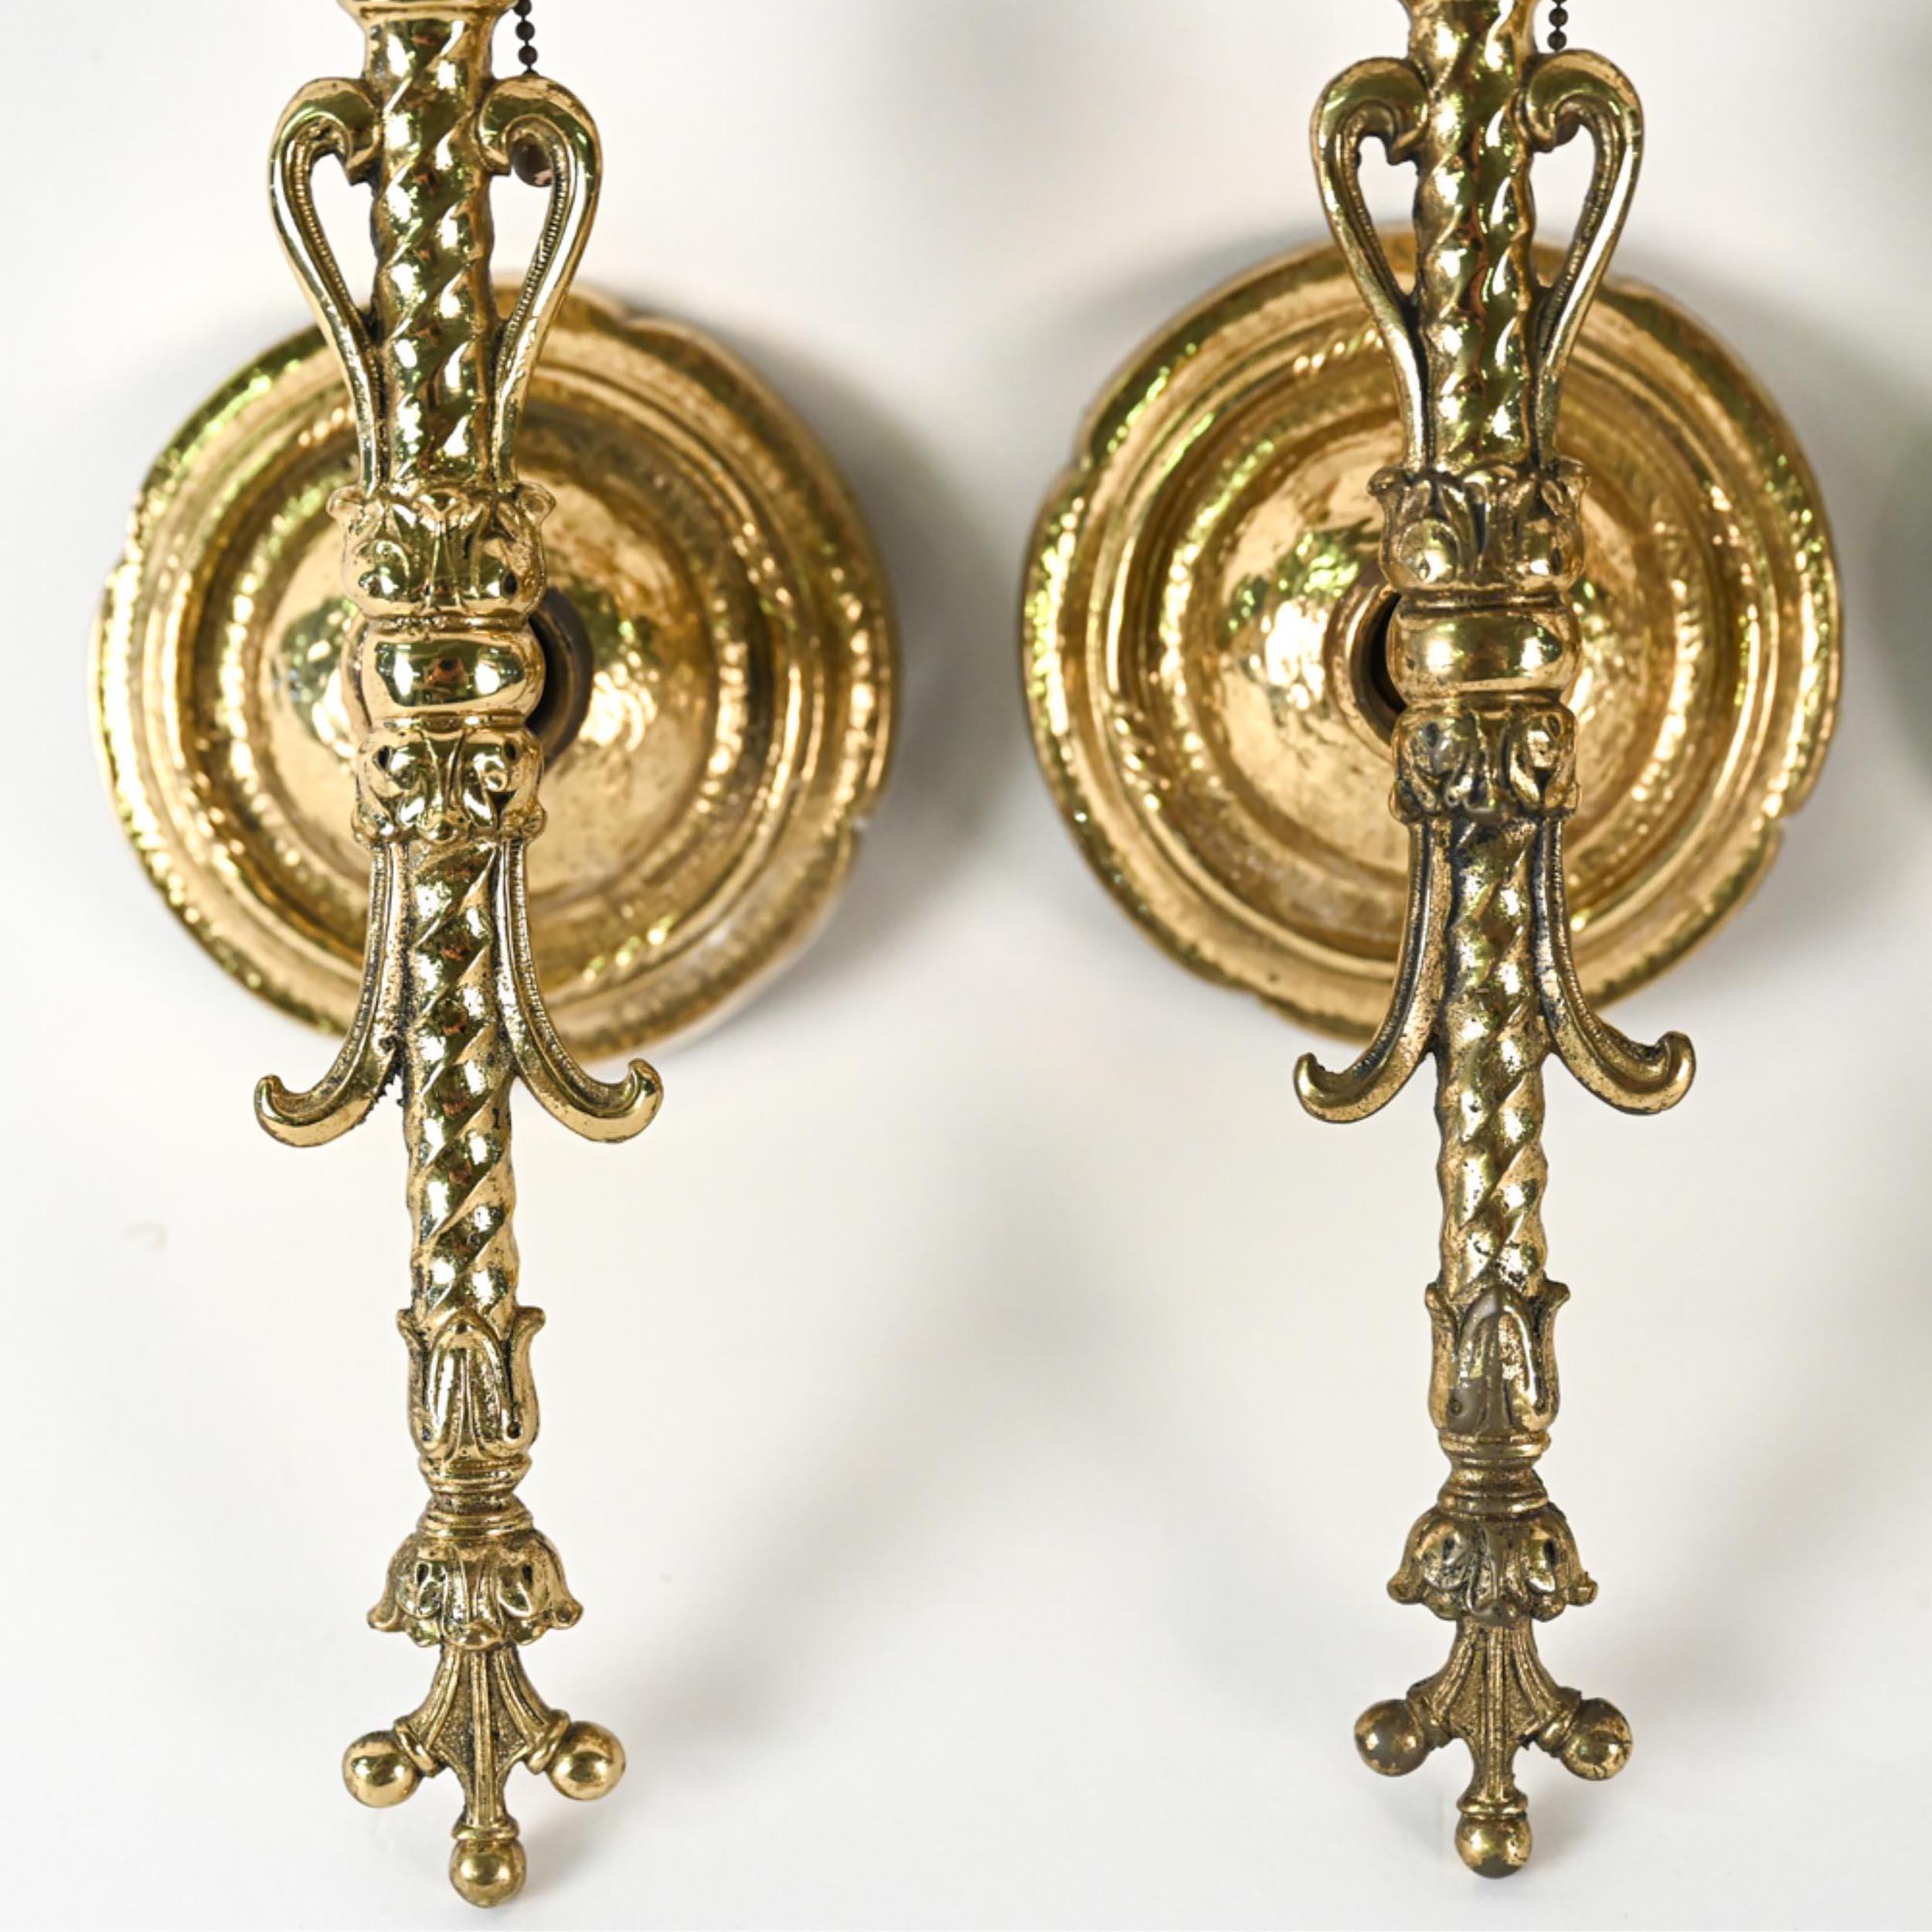 Cast Brass Single Candle Sconce Between Beaux Arts & American Tudor In Good Condition For Sale In Minneapolis, MN